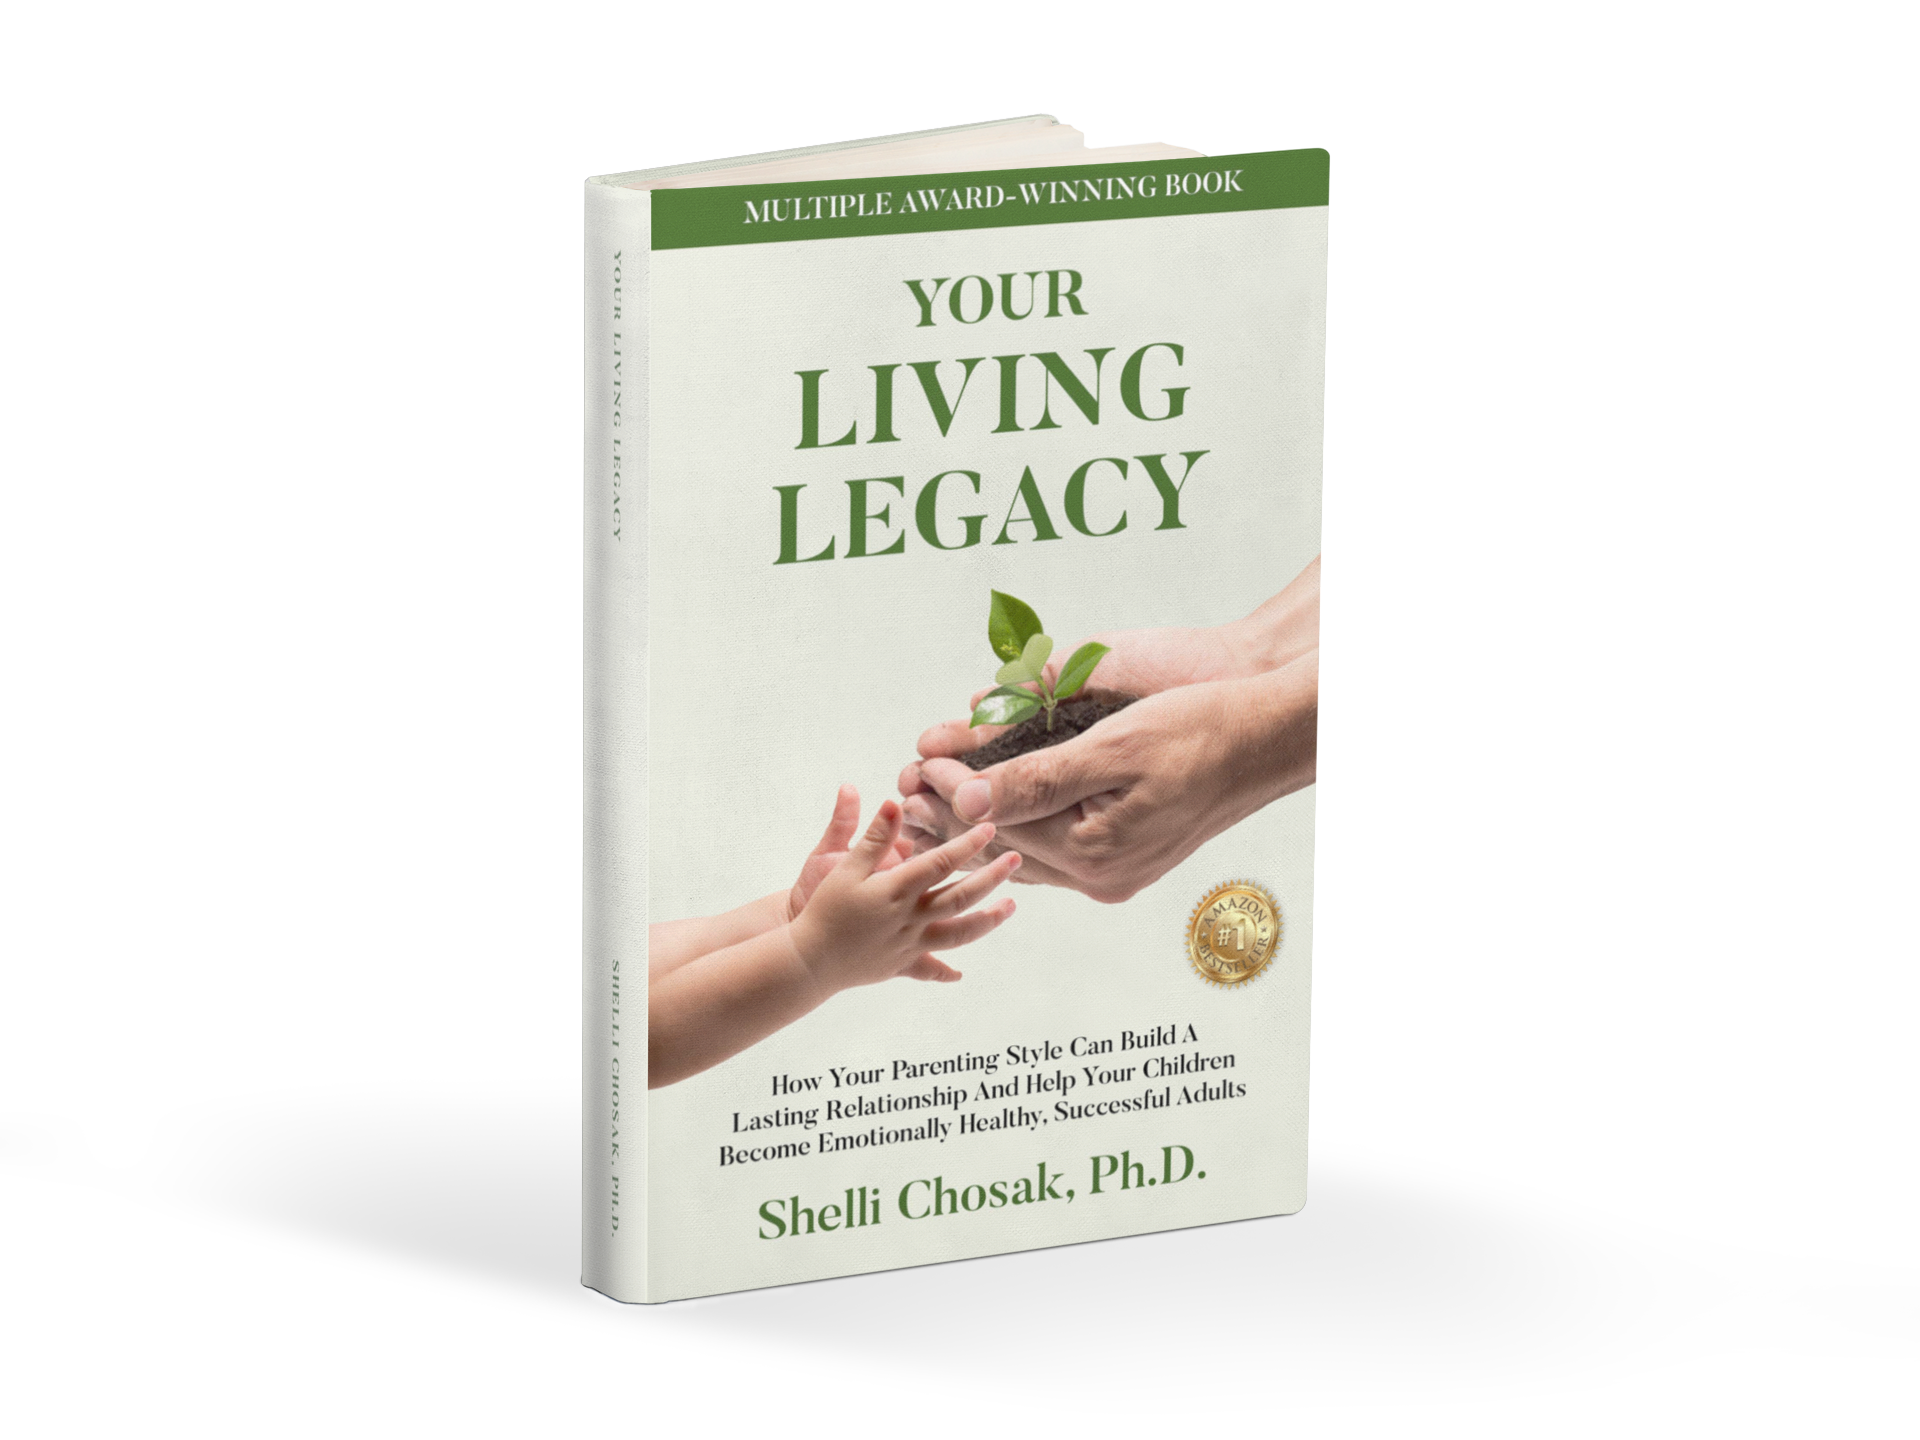 Your Living Legacy by Shelli Chosak, Ph.D. Showcases How One’s Parenting Style Shapes Future Parent-Child Relationships